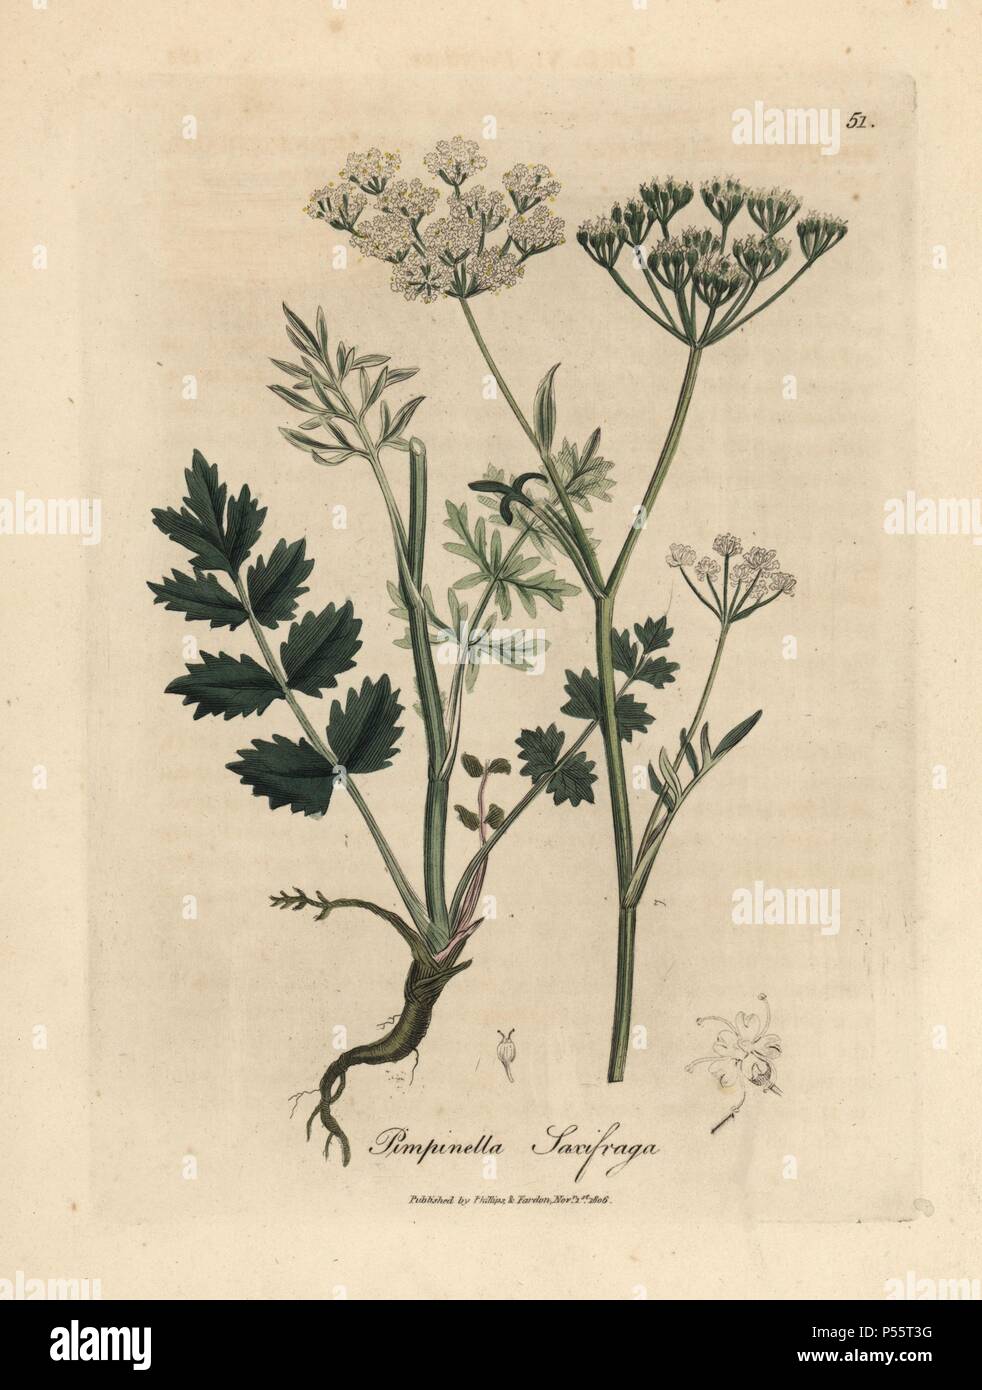 Burnet saxifrage, Pimpinella saxifraga. Handcoloured copperplate engraving from a botanical illustration by James Sowerby from William Woodville and Sir William Jackson Hooker's 'Medical Botany,' John Bohn, London, 1832. The tireless Sowerby (1757-1822) drew over 2, 500 plants for Smith's mammoth 'English Botany' (1790-1814) and 440 mushrooms for 'Coloured Figures of English Fungi ' (1797) among many other works. Stock Photo